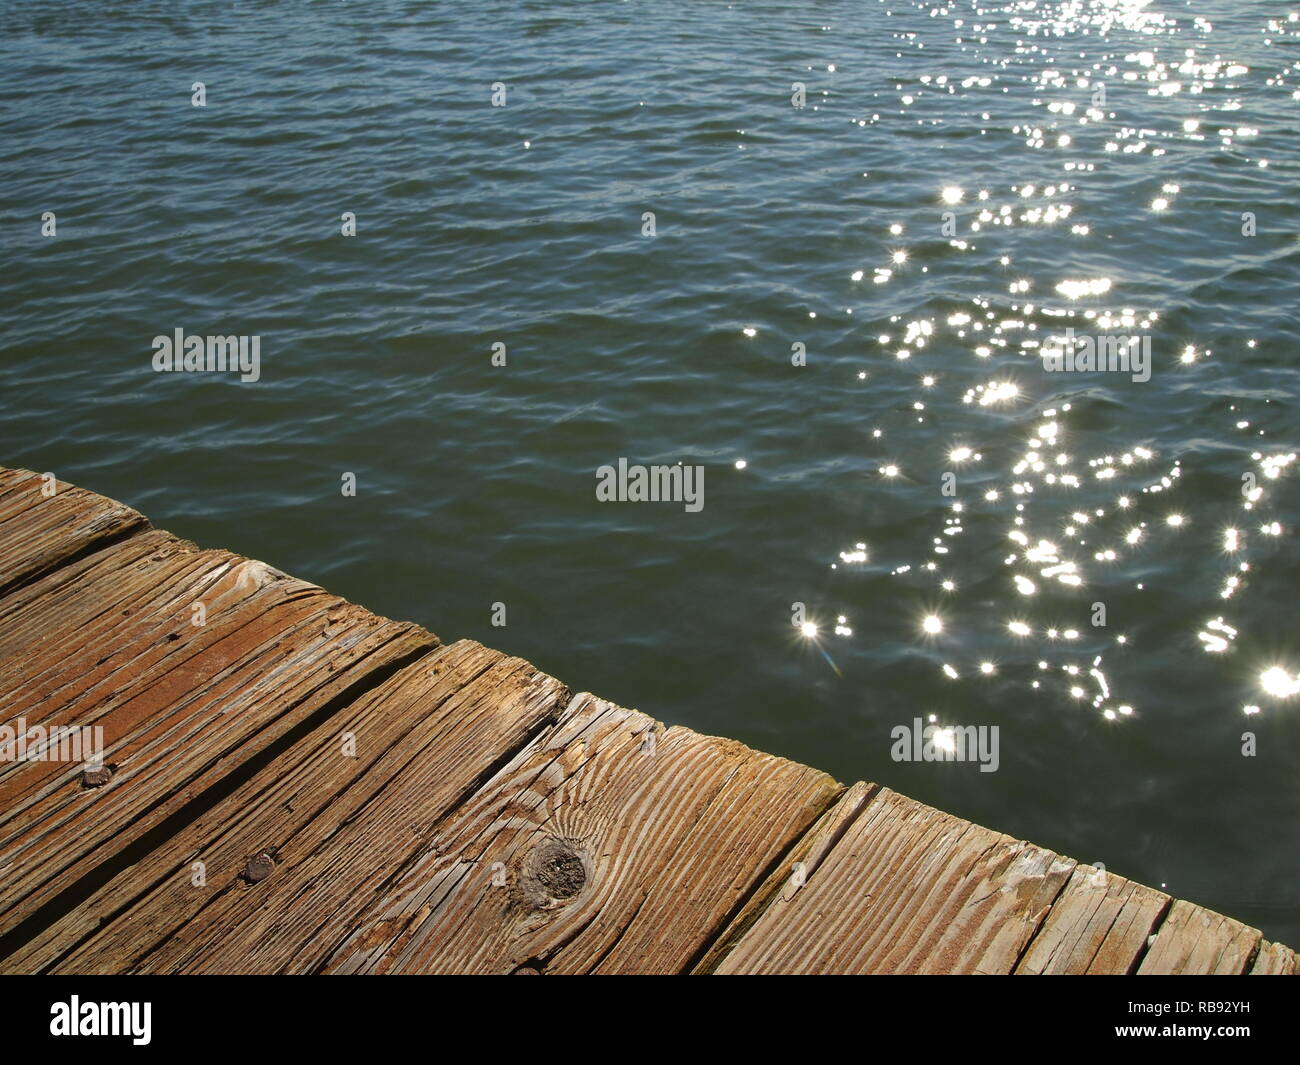 Glistening sunlight reflections on water beneath wooden dock. Close-up perspective of weathered wooden boards. Angled perspective, minimalism, texture Stock Photo